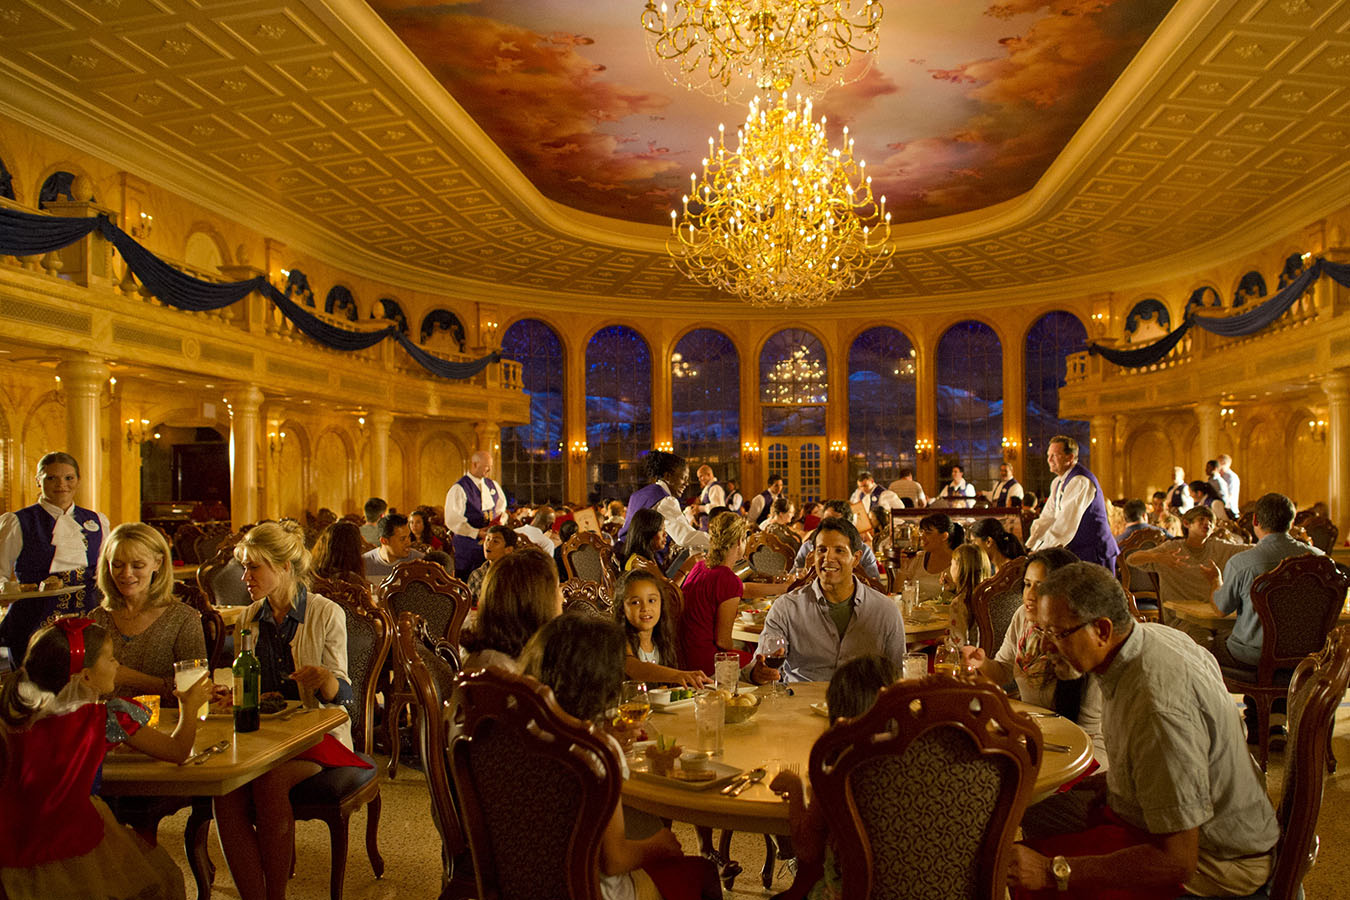 Magic Kingdom Guests Dine in Splendor at Be Our Guest Restaurant